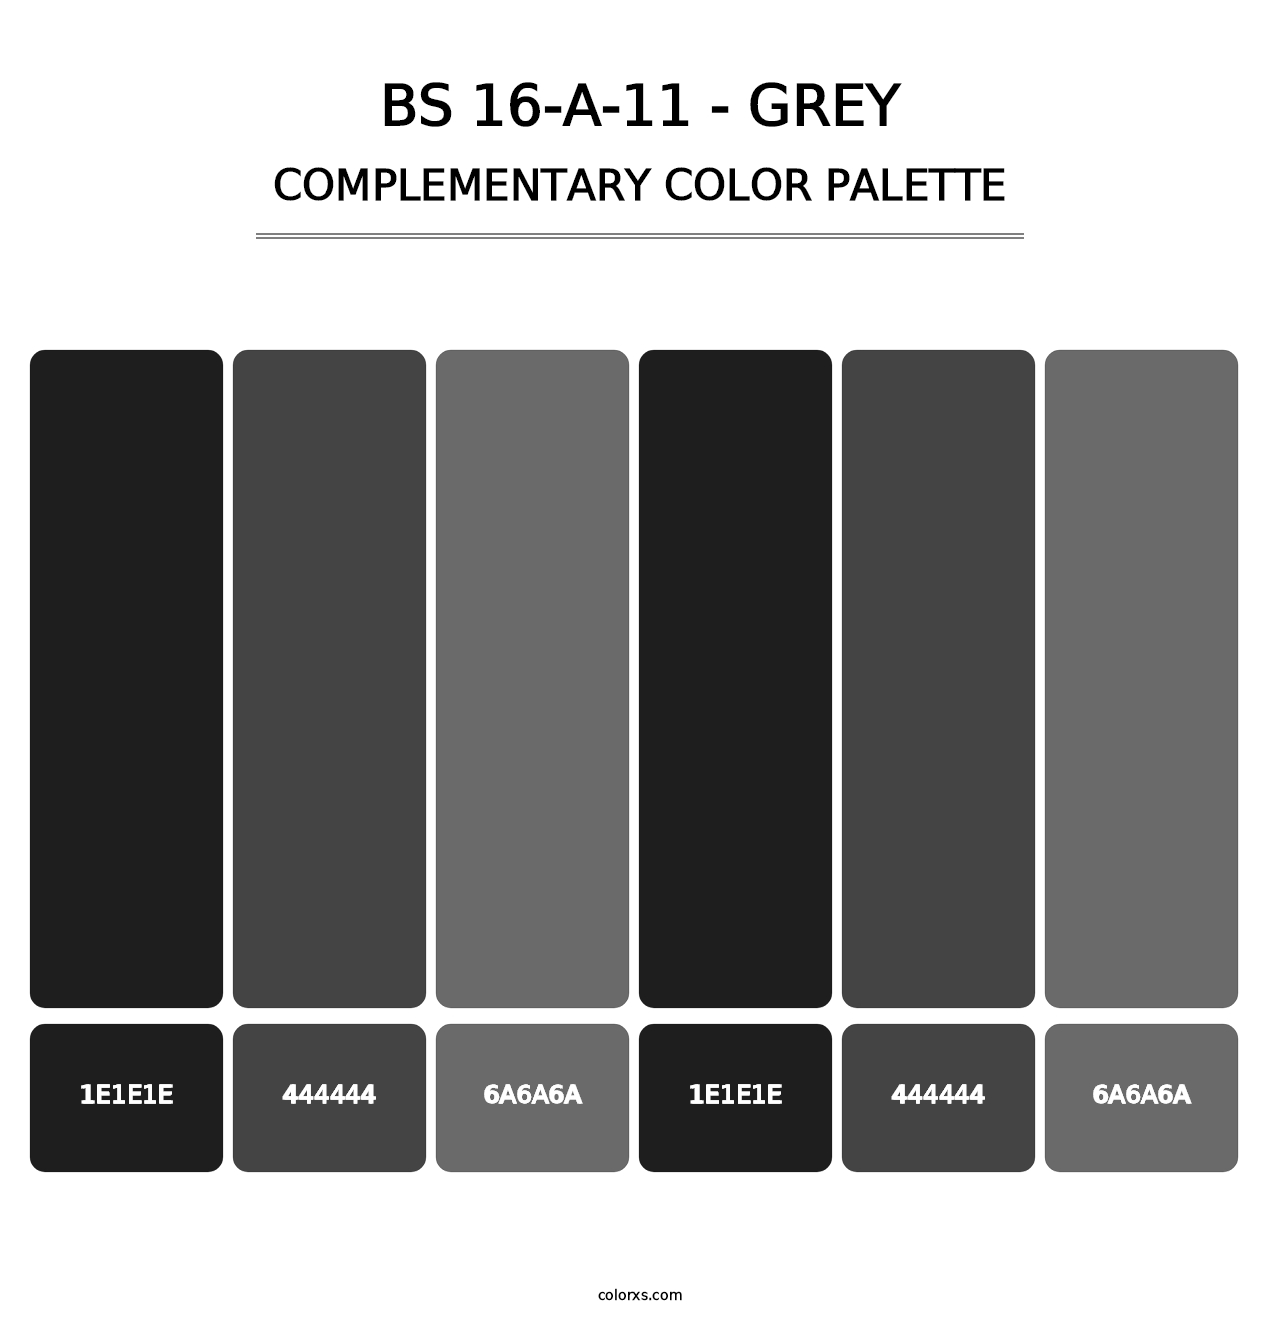 BS 16-A-11 - Grey - Complementary Color Palette